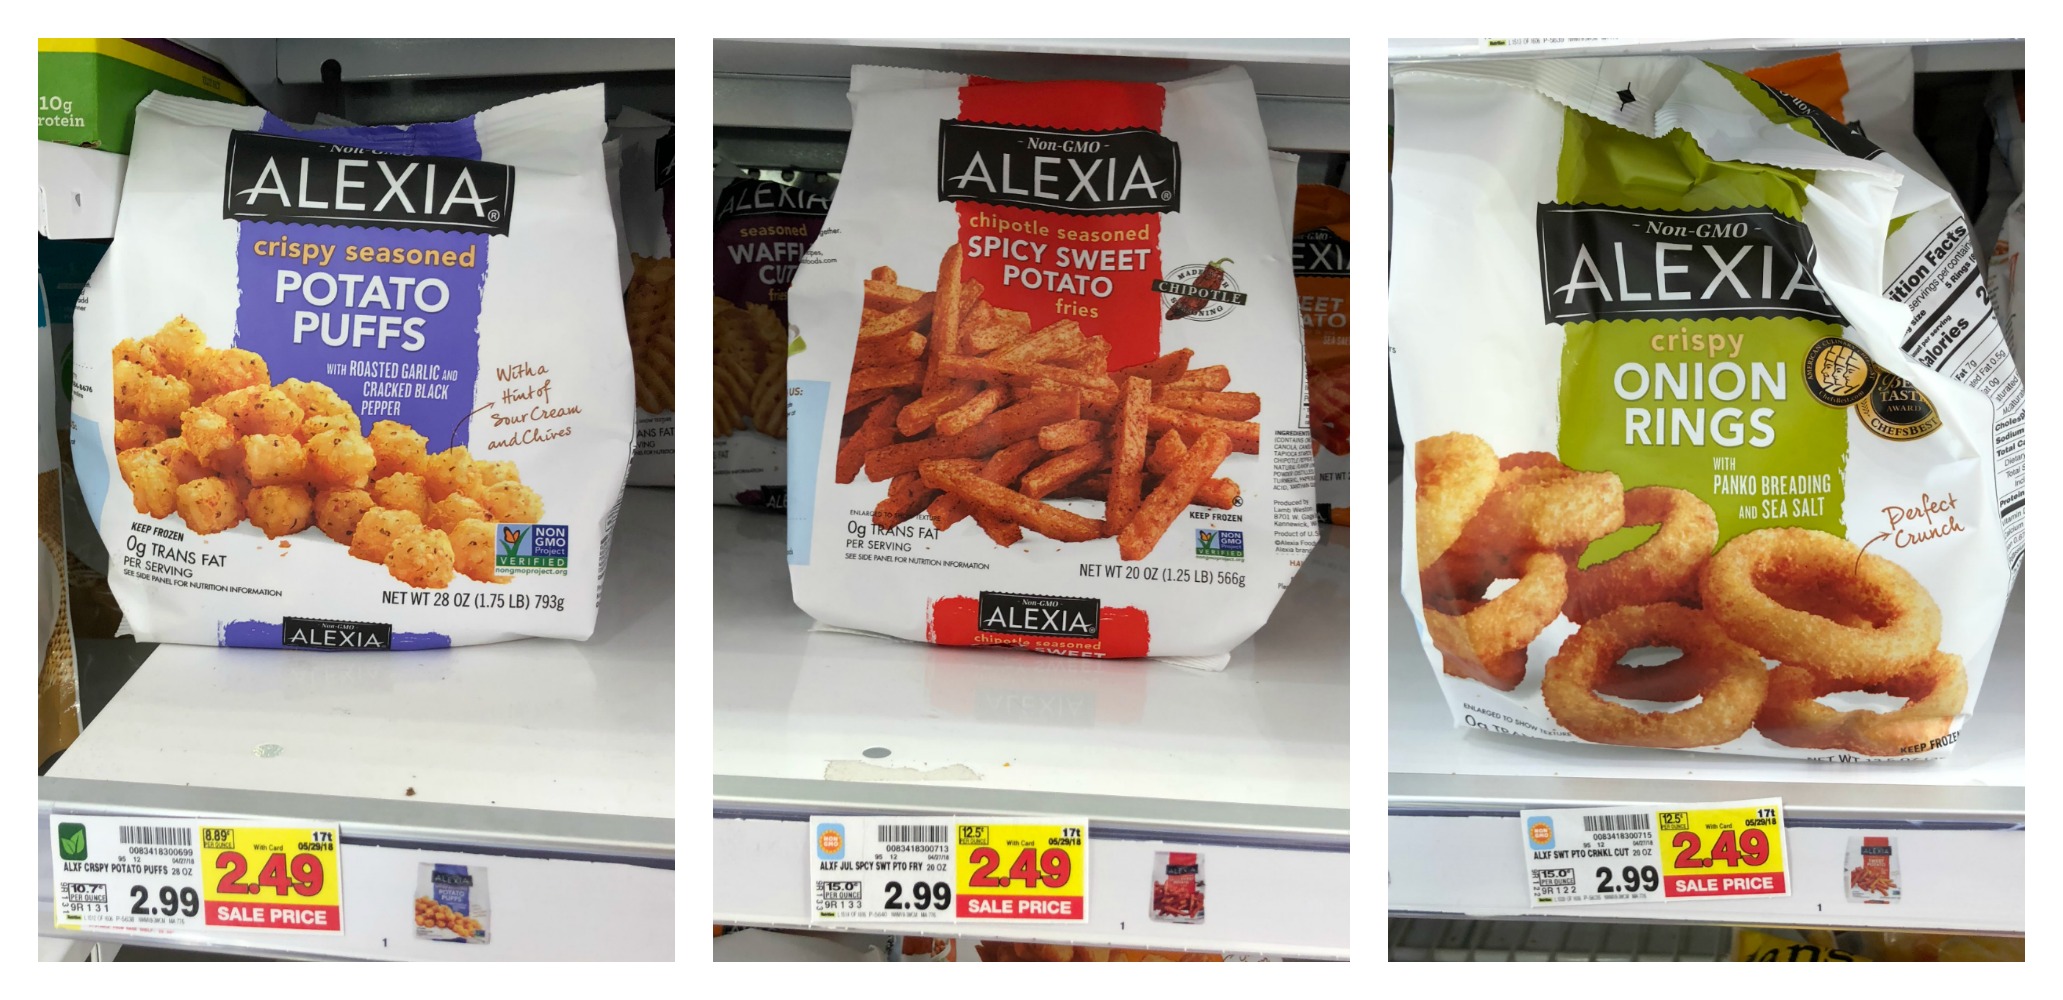 Alexia Onion Rings Golden With Sea Salt: Nutrition & Ingredients |  GreenChoice